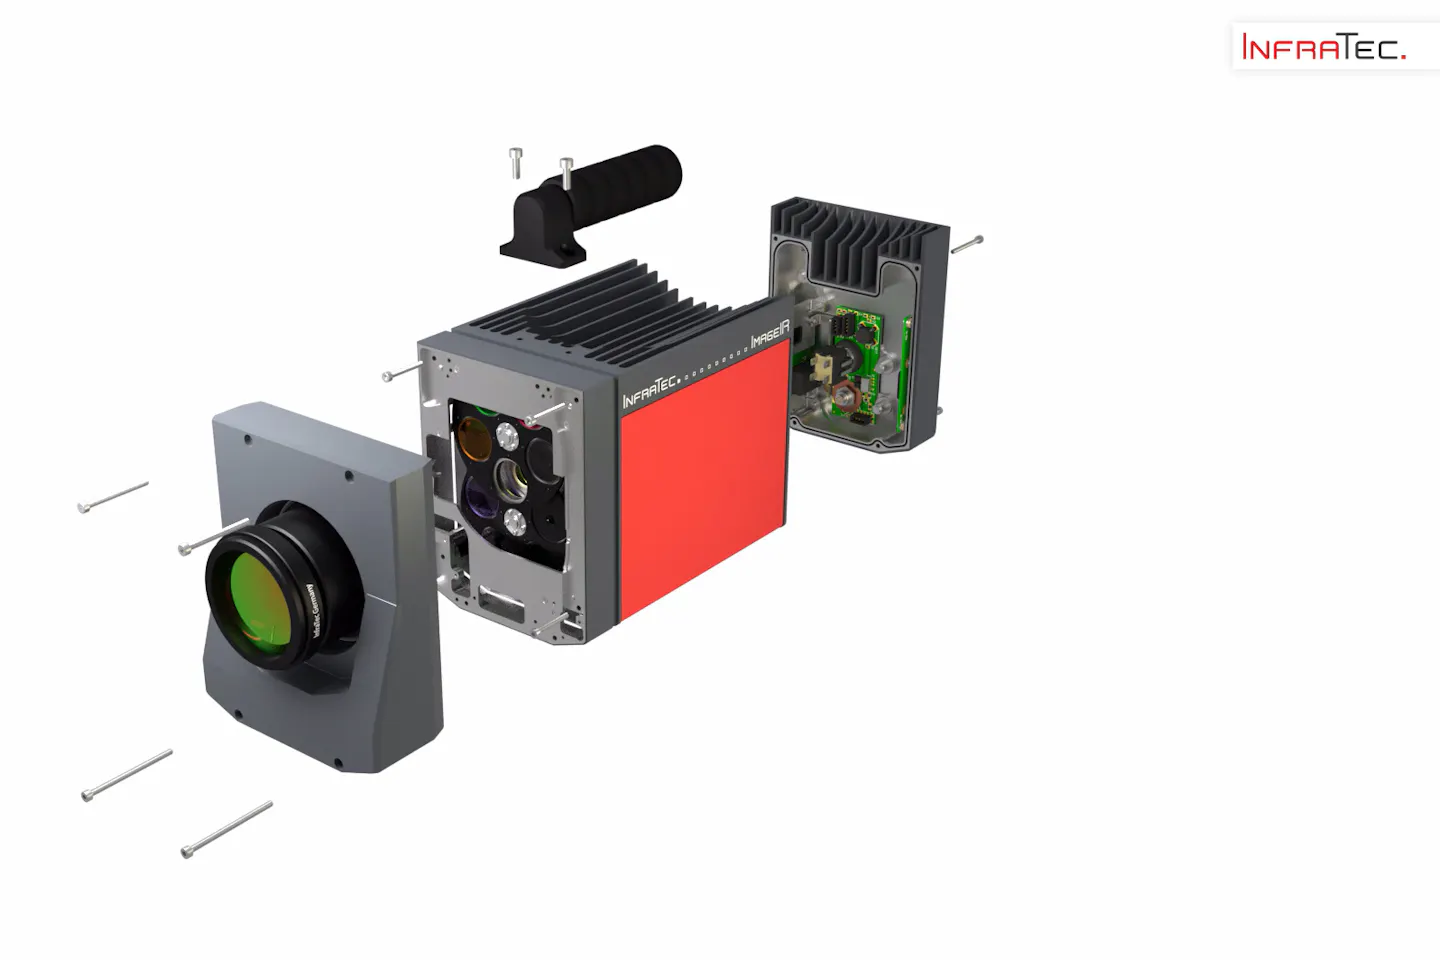 Modular design of infrared camera ImageIR® from InfraTec